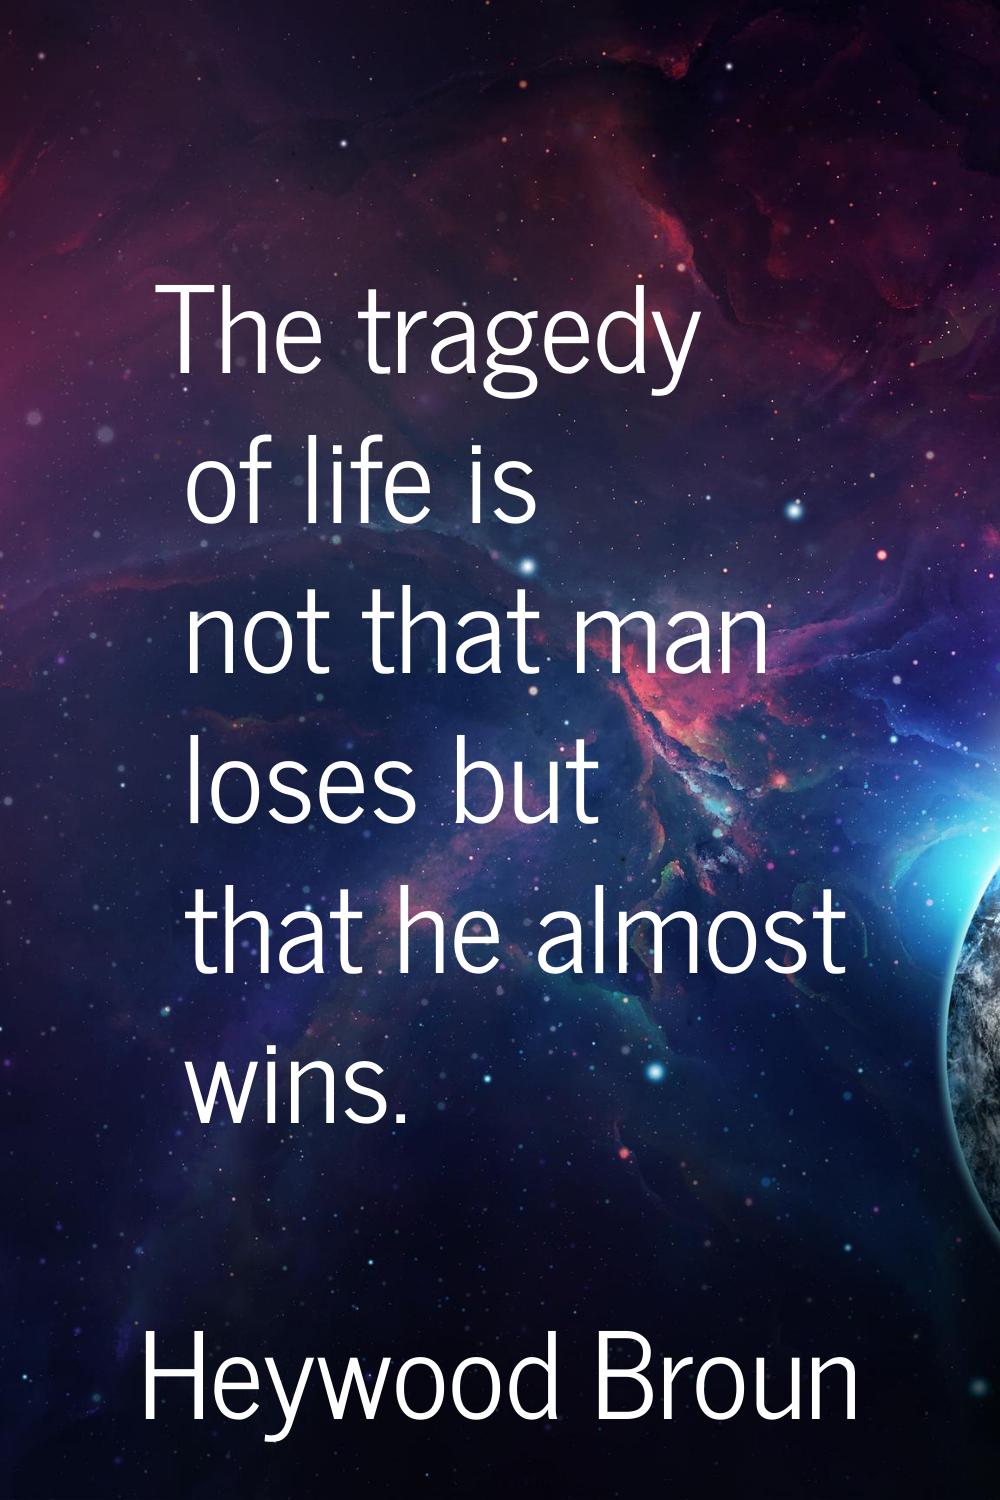 The tragedy of life is not that man loses but that he almost wins.